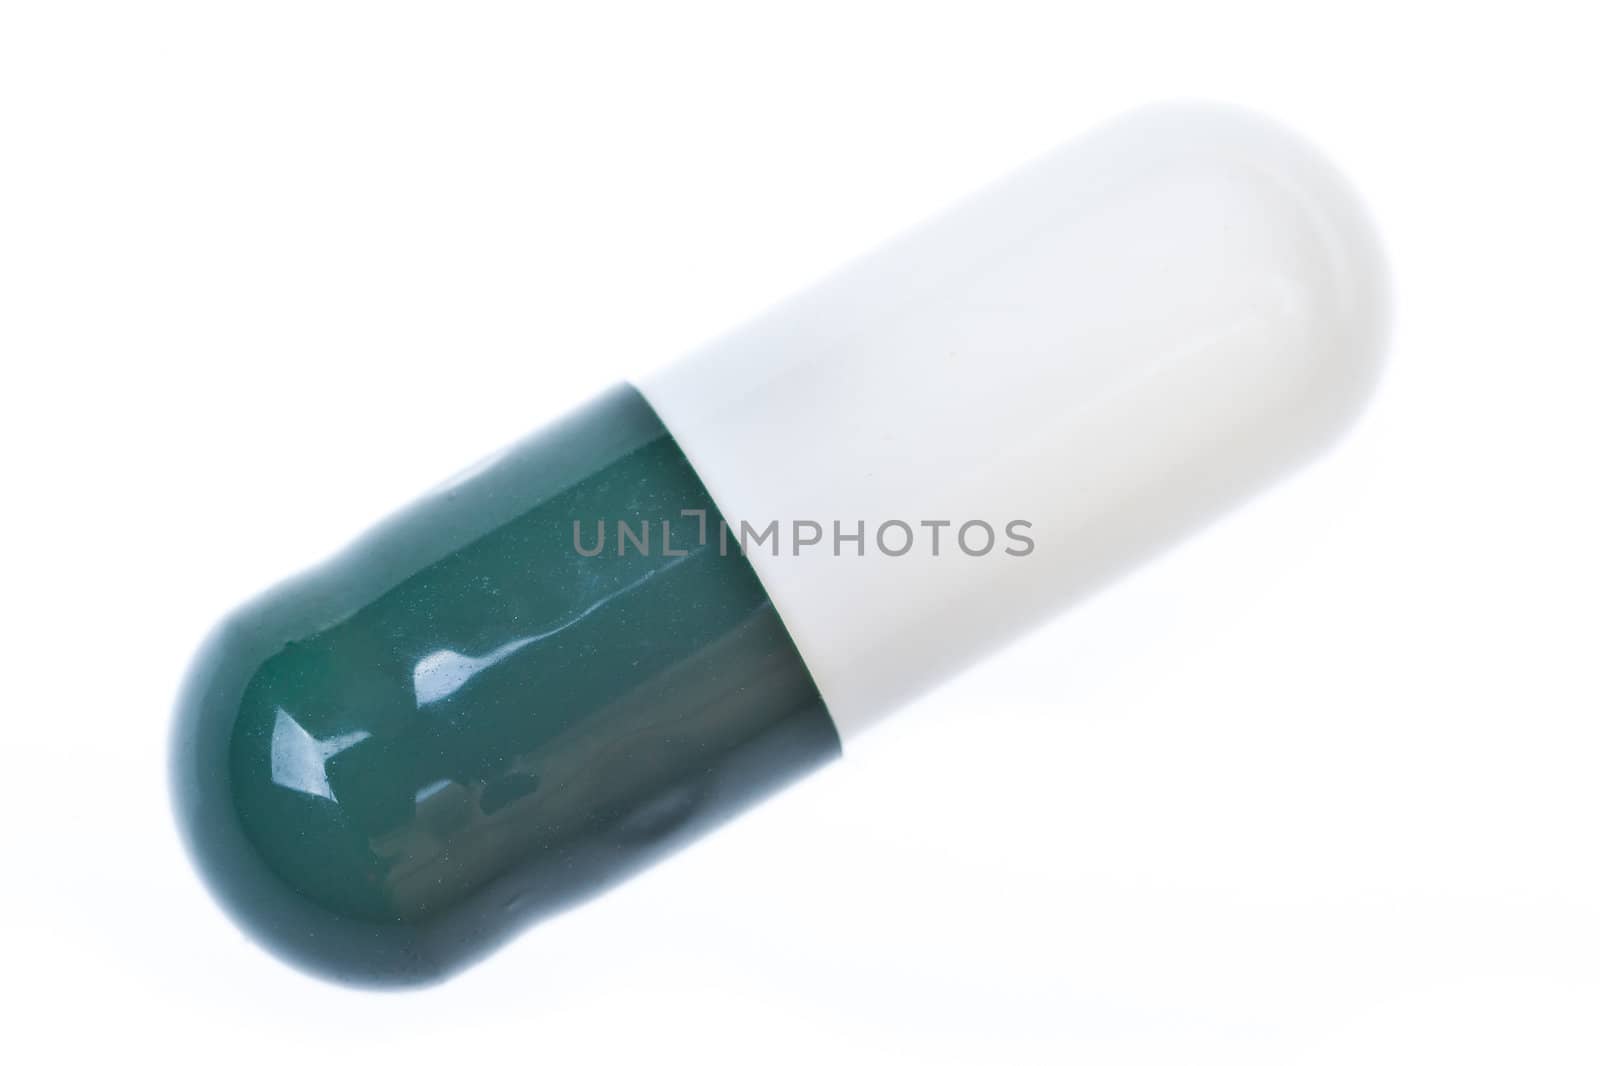 Extreme macro of a single pill over white background